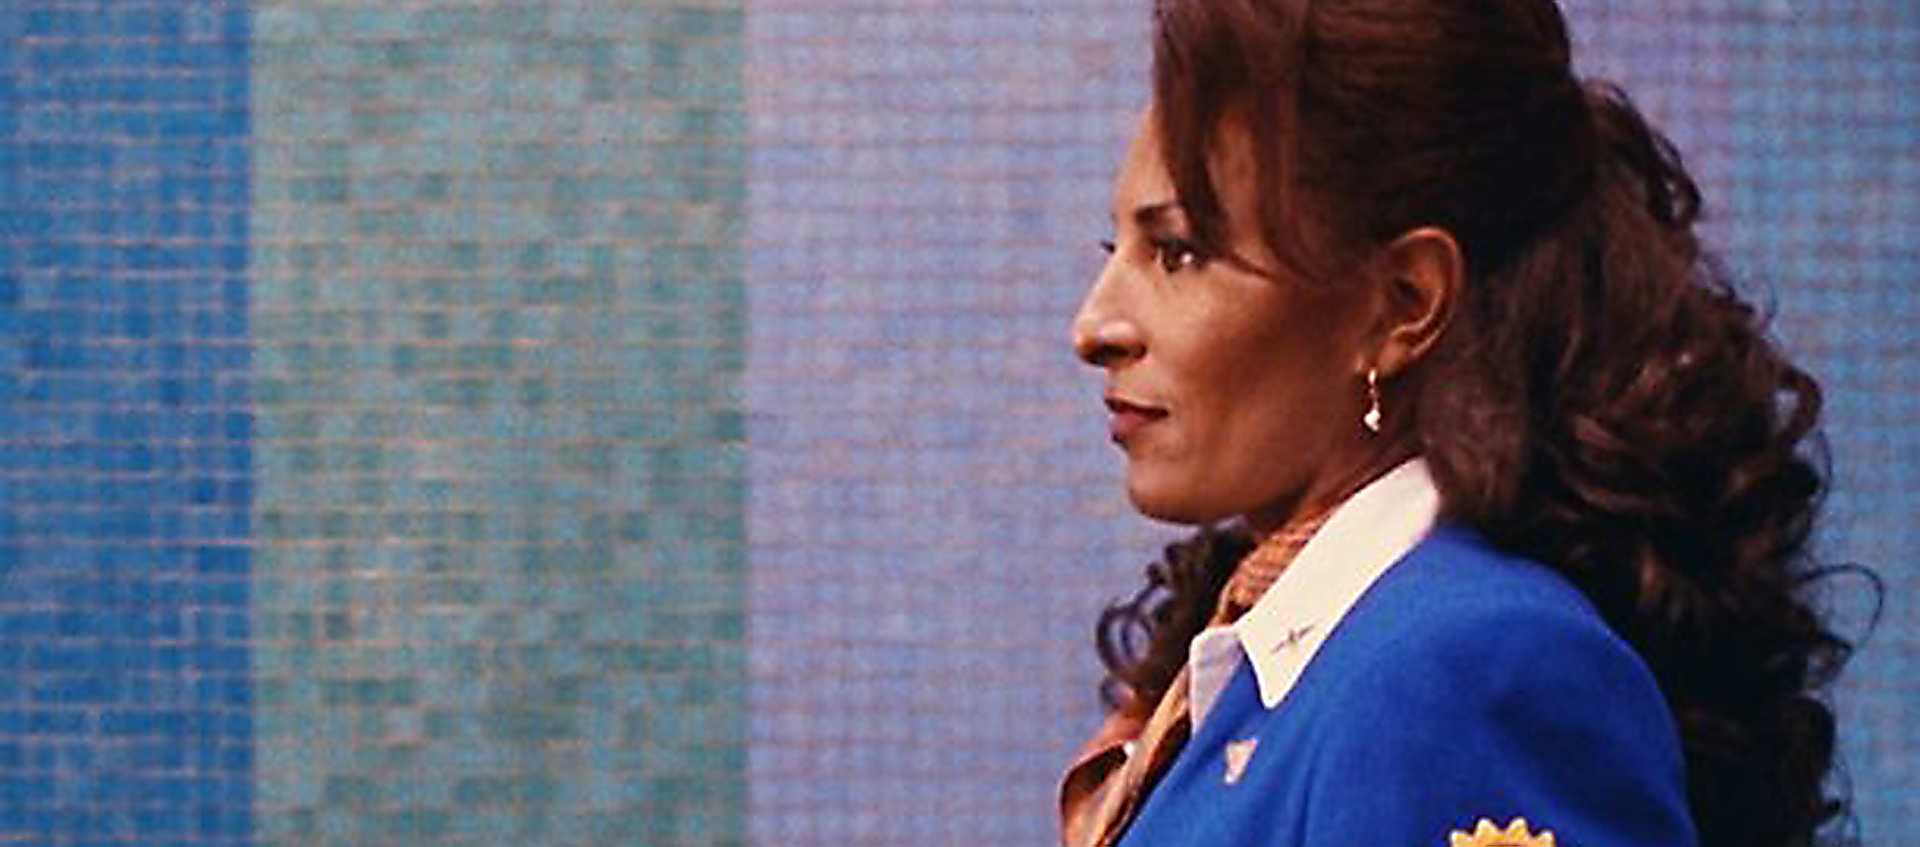 Pam Grier in profile wearing a bright blue flight attendant uniform with white collar. Her hair is long and hangs over her shoulders. She stares straight ahead in front of a blue tiled wall.